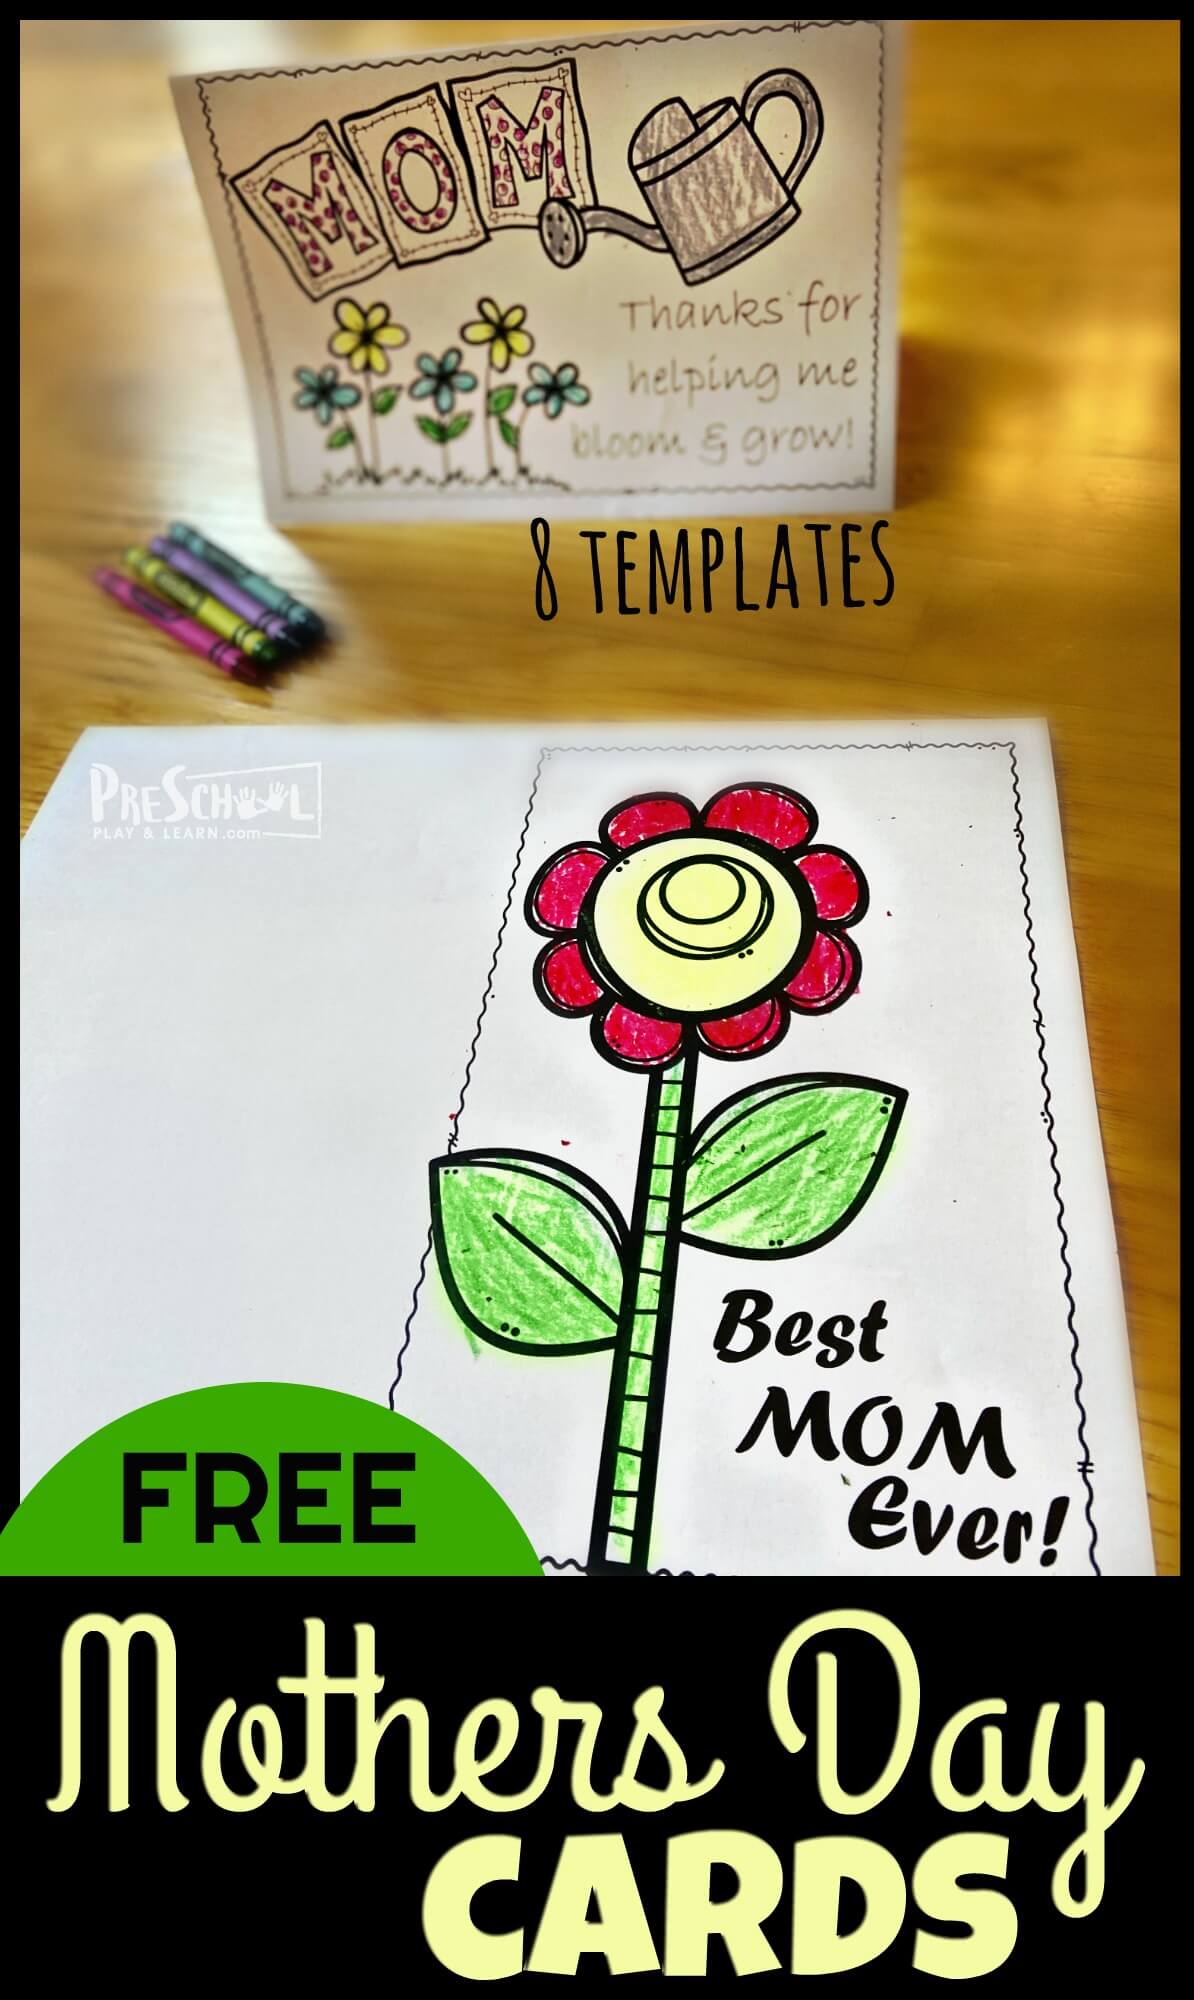 12 Super Cute Mother's Day Crafts for Kids - Such Great Gift Ideas!